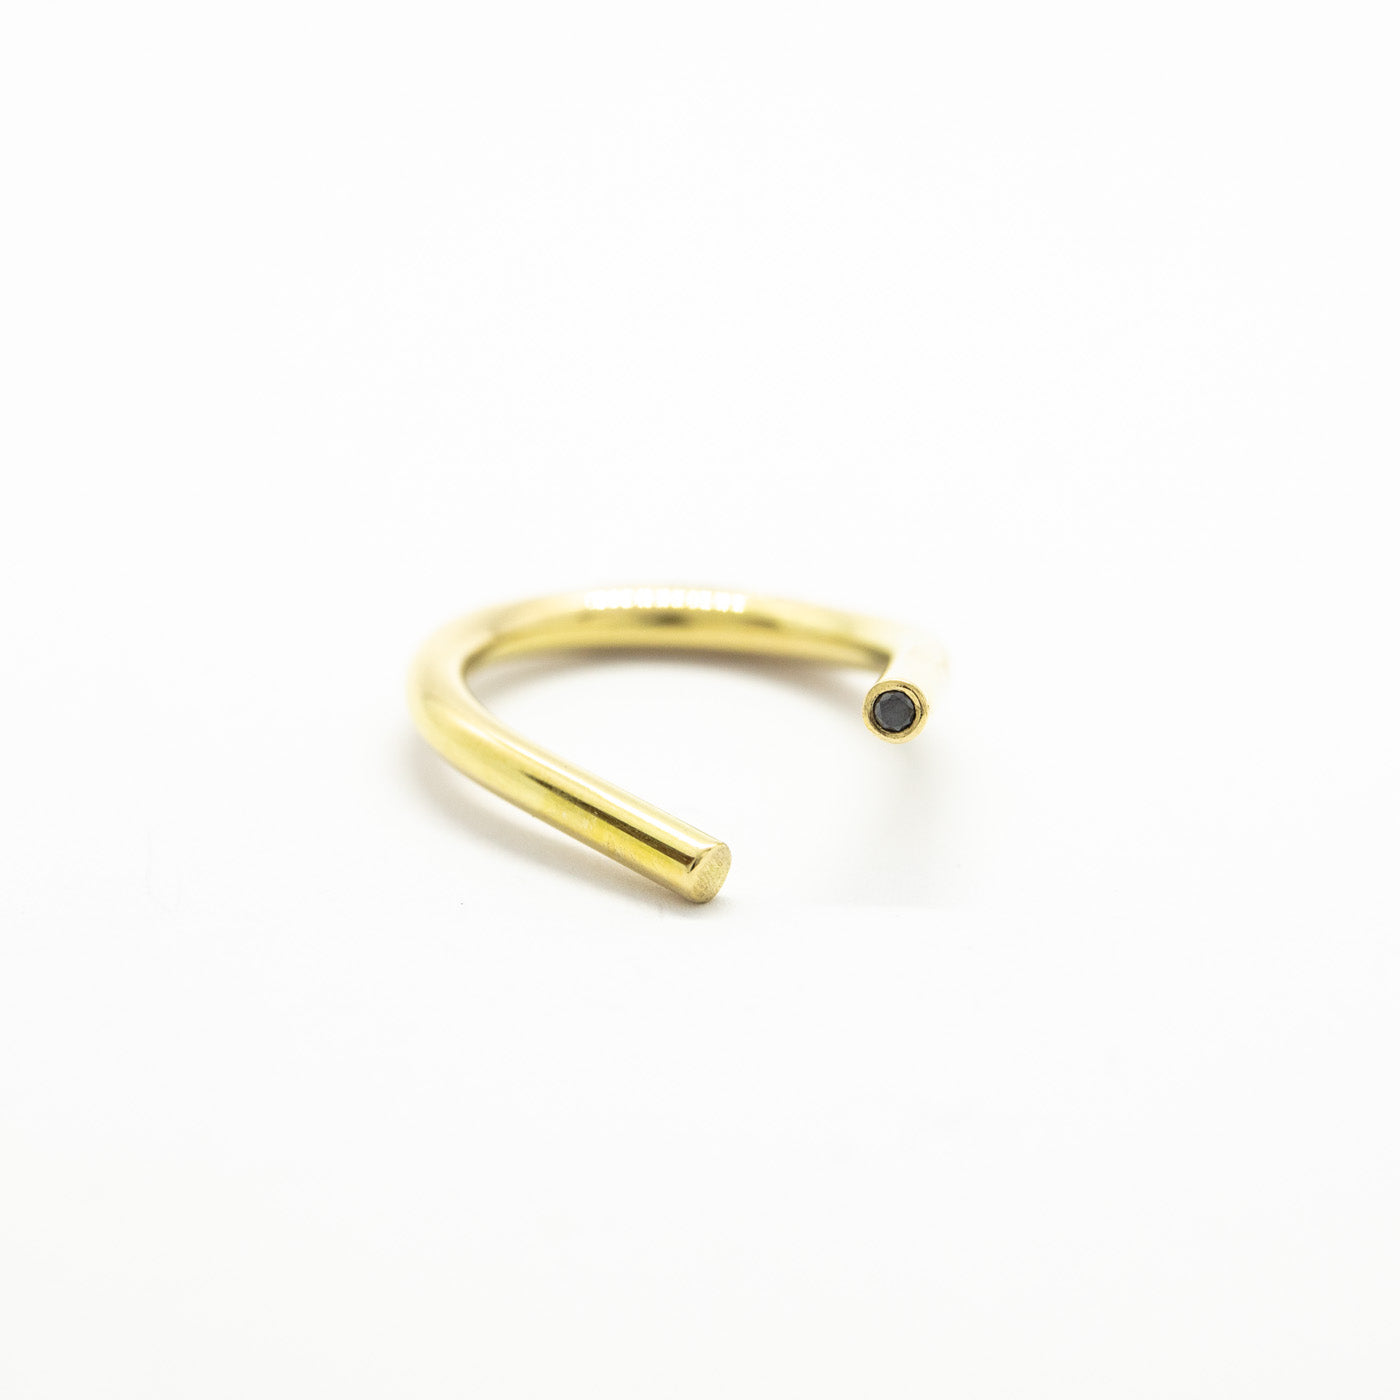 ring chaotic golden curve 14ct  or 18ct gold with black diamond product view innan jewellery independent atelier berlin